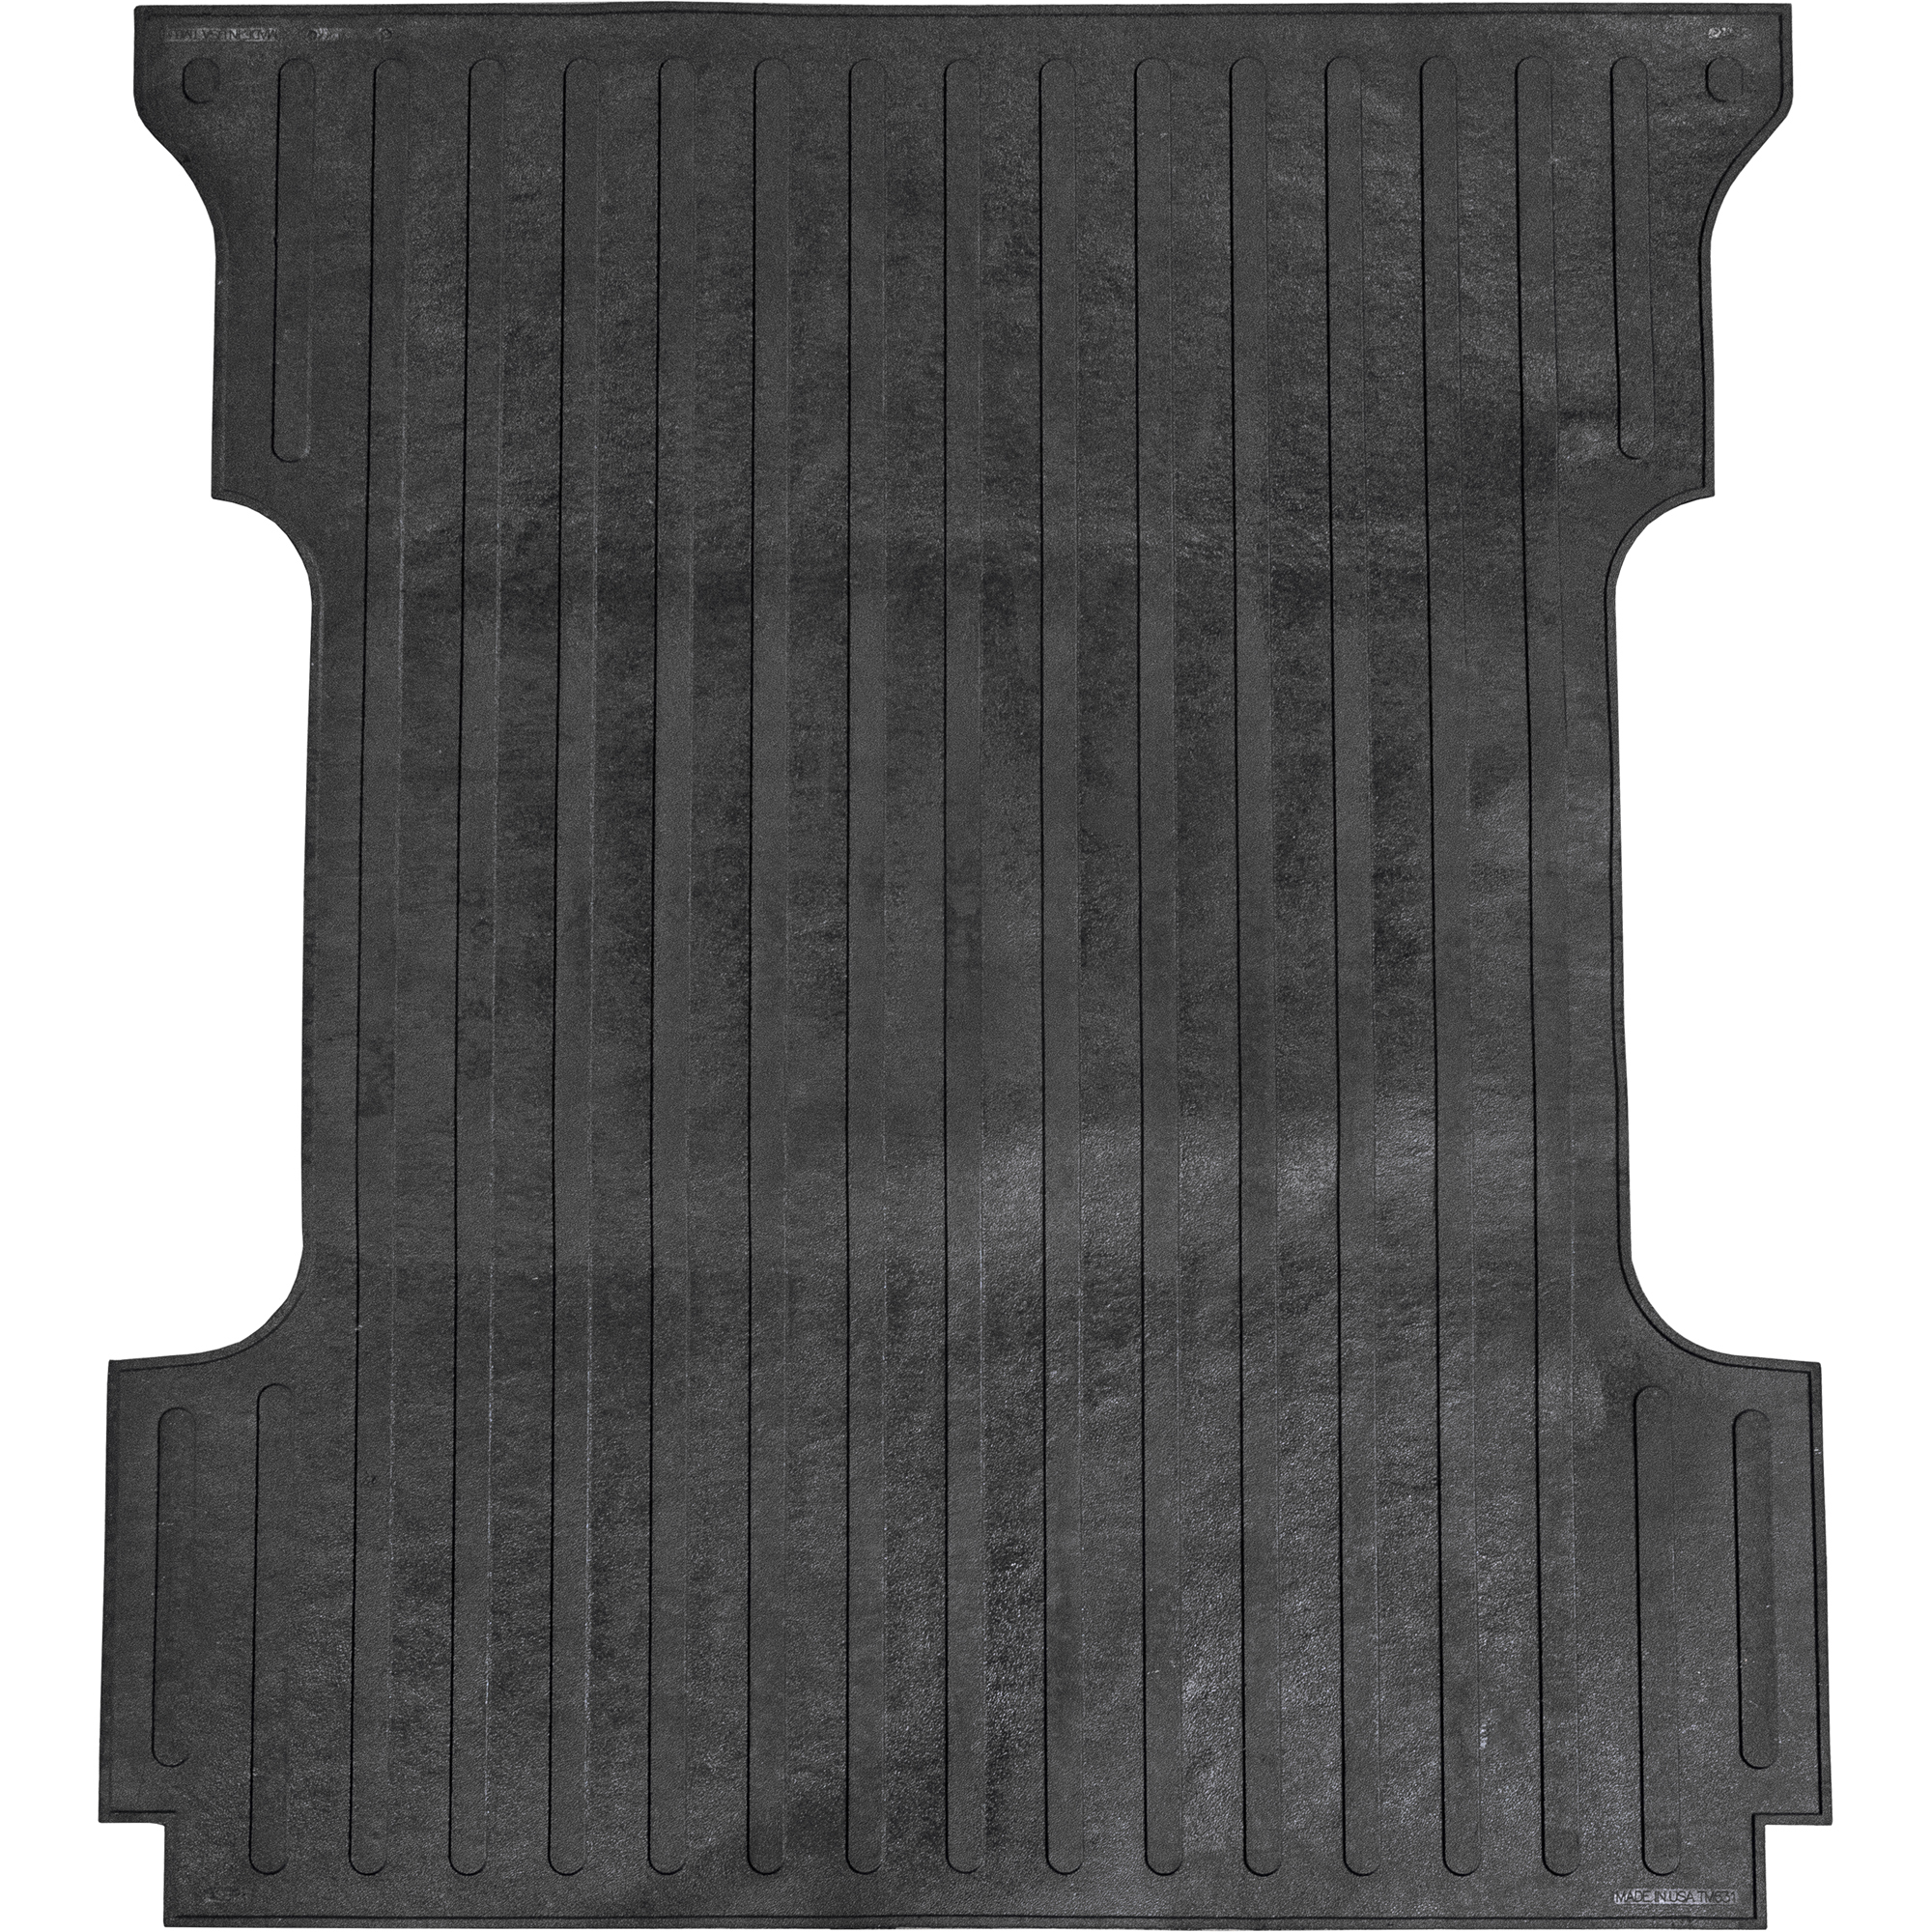 Boomerang Rubber, Ford F-150 Year 2015+, Bed Mat, Standard Bed, 6ft. Long, Primary Color Black, Model TM631BAGGED